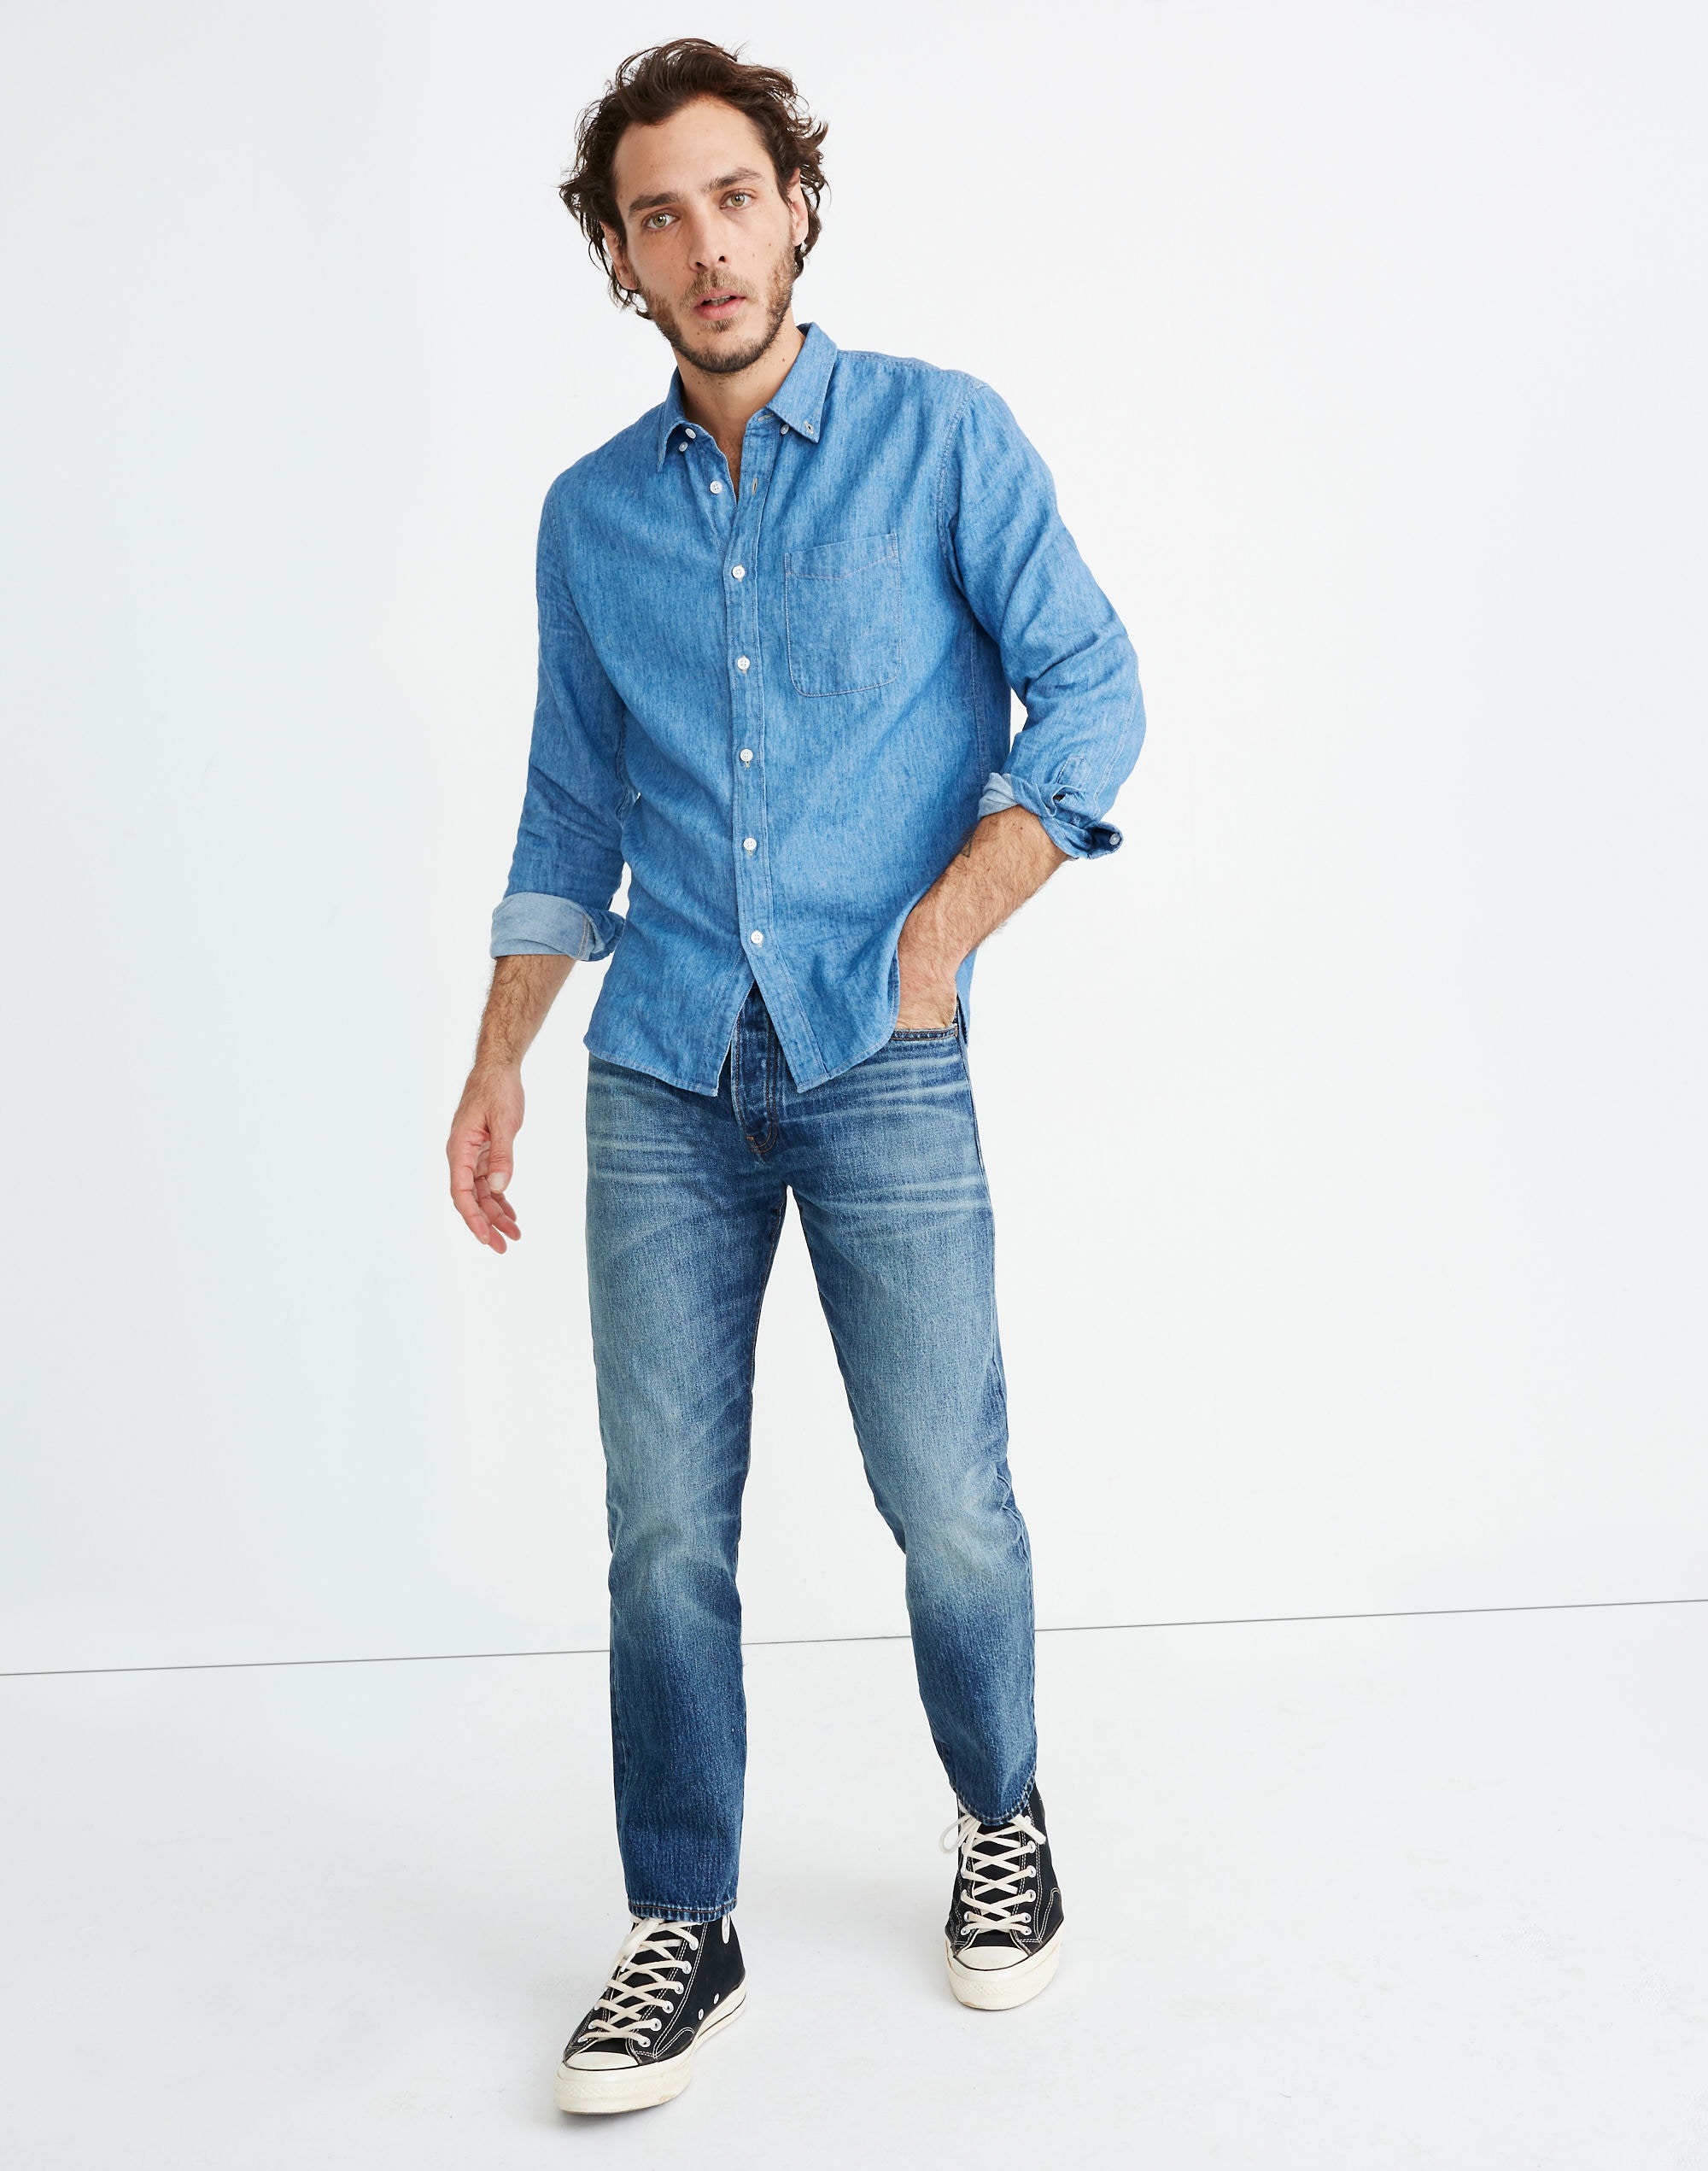 Men's Slim Rigid Jeans in Misthaven Wash | Madewell